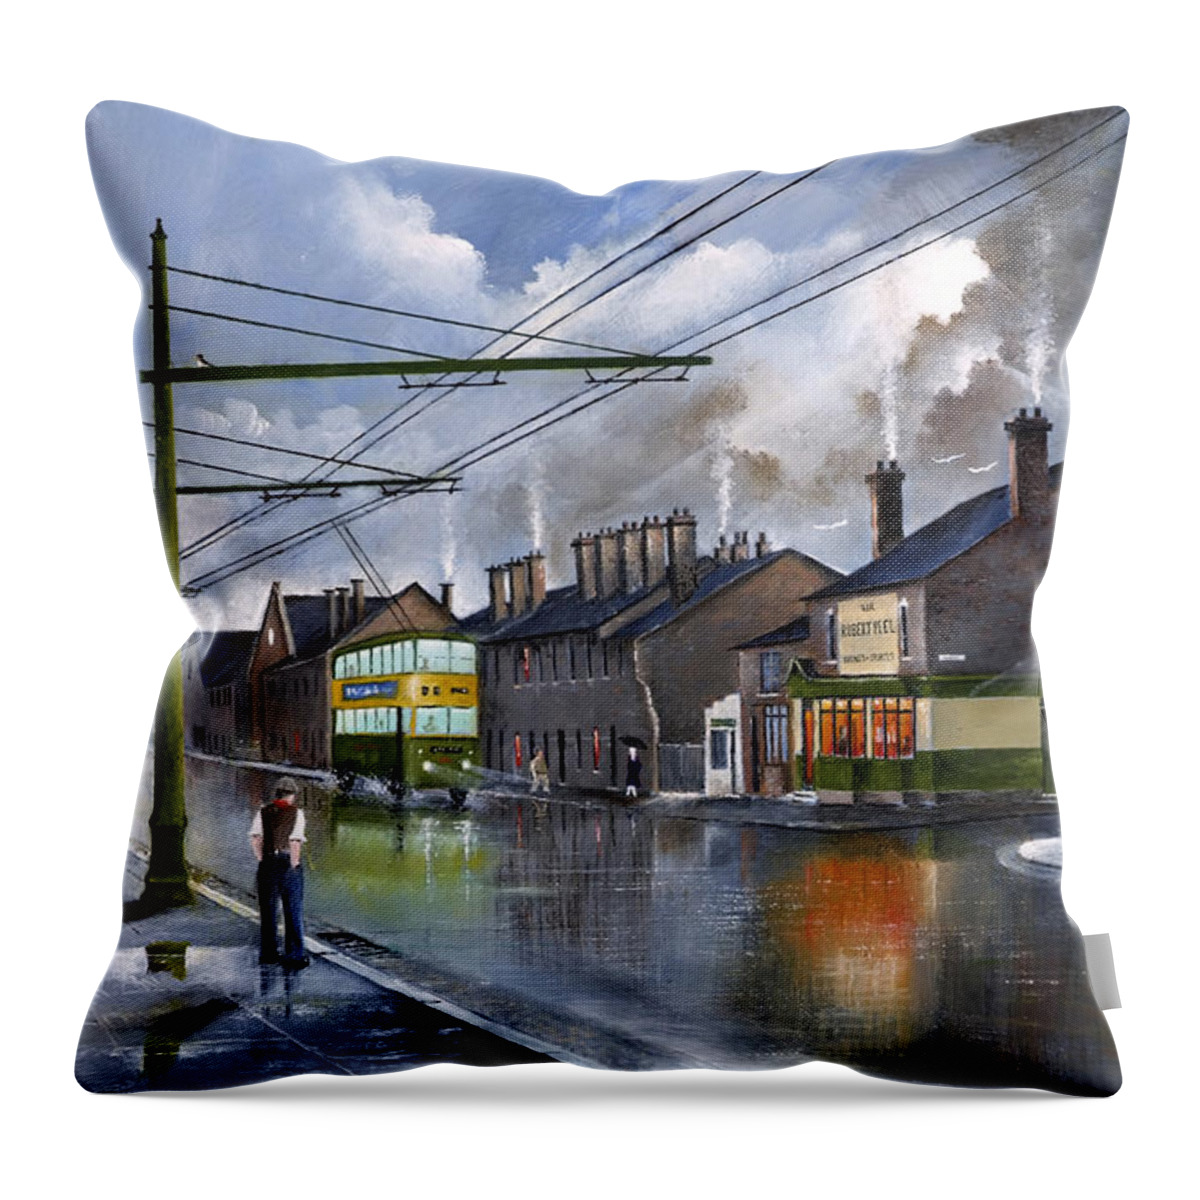 England Throw Pillow featuring the painting Salop Street, Dudley - England by Ken Wood